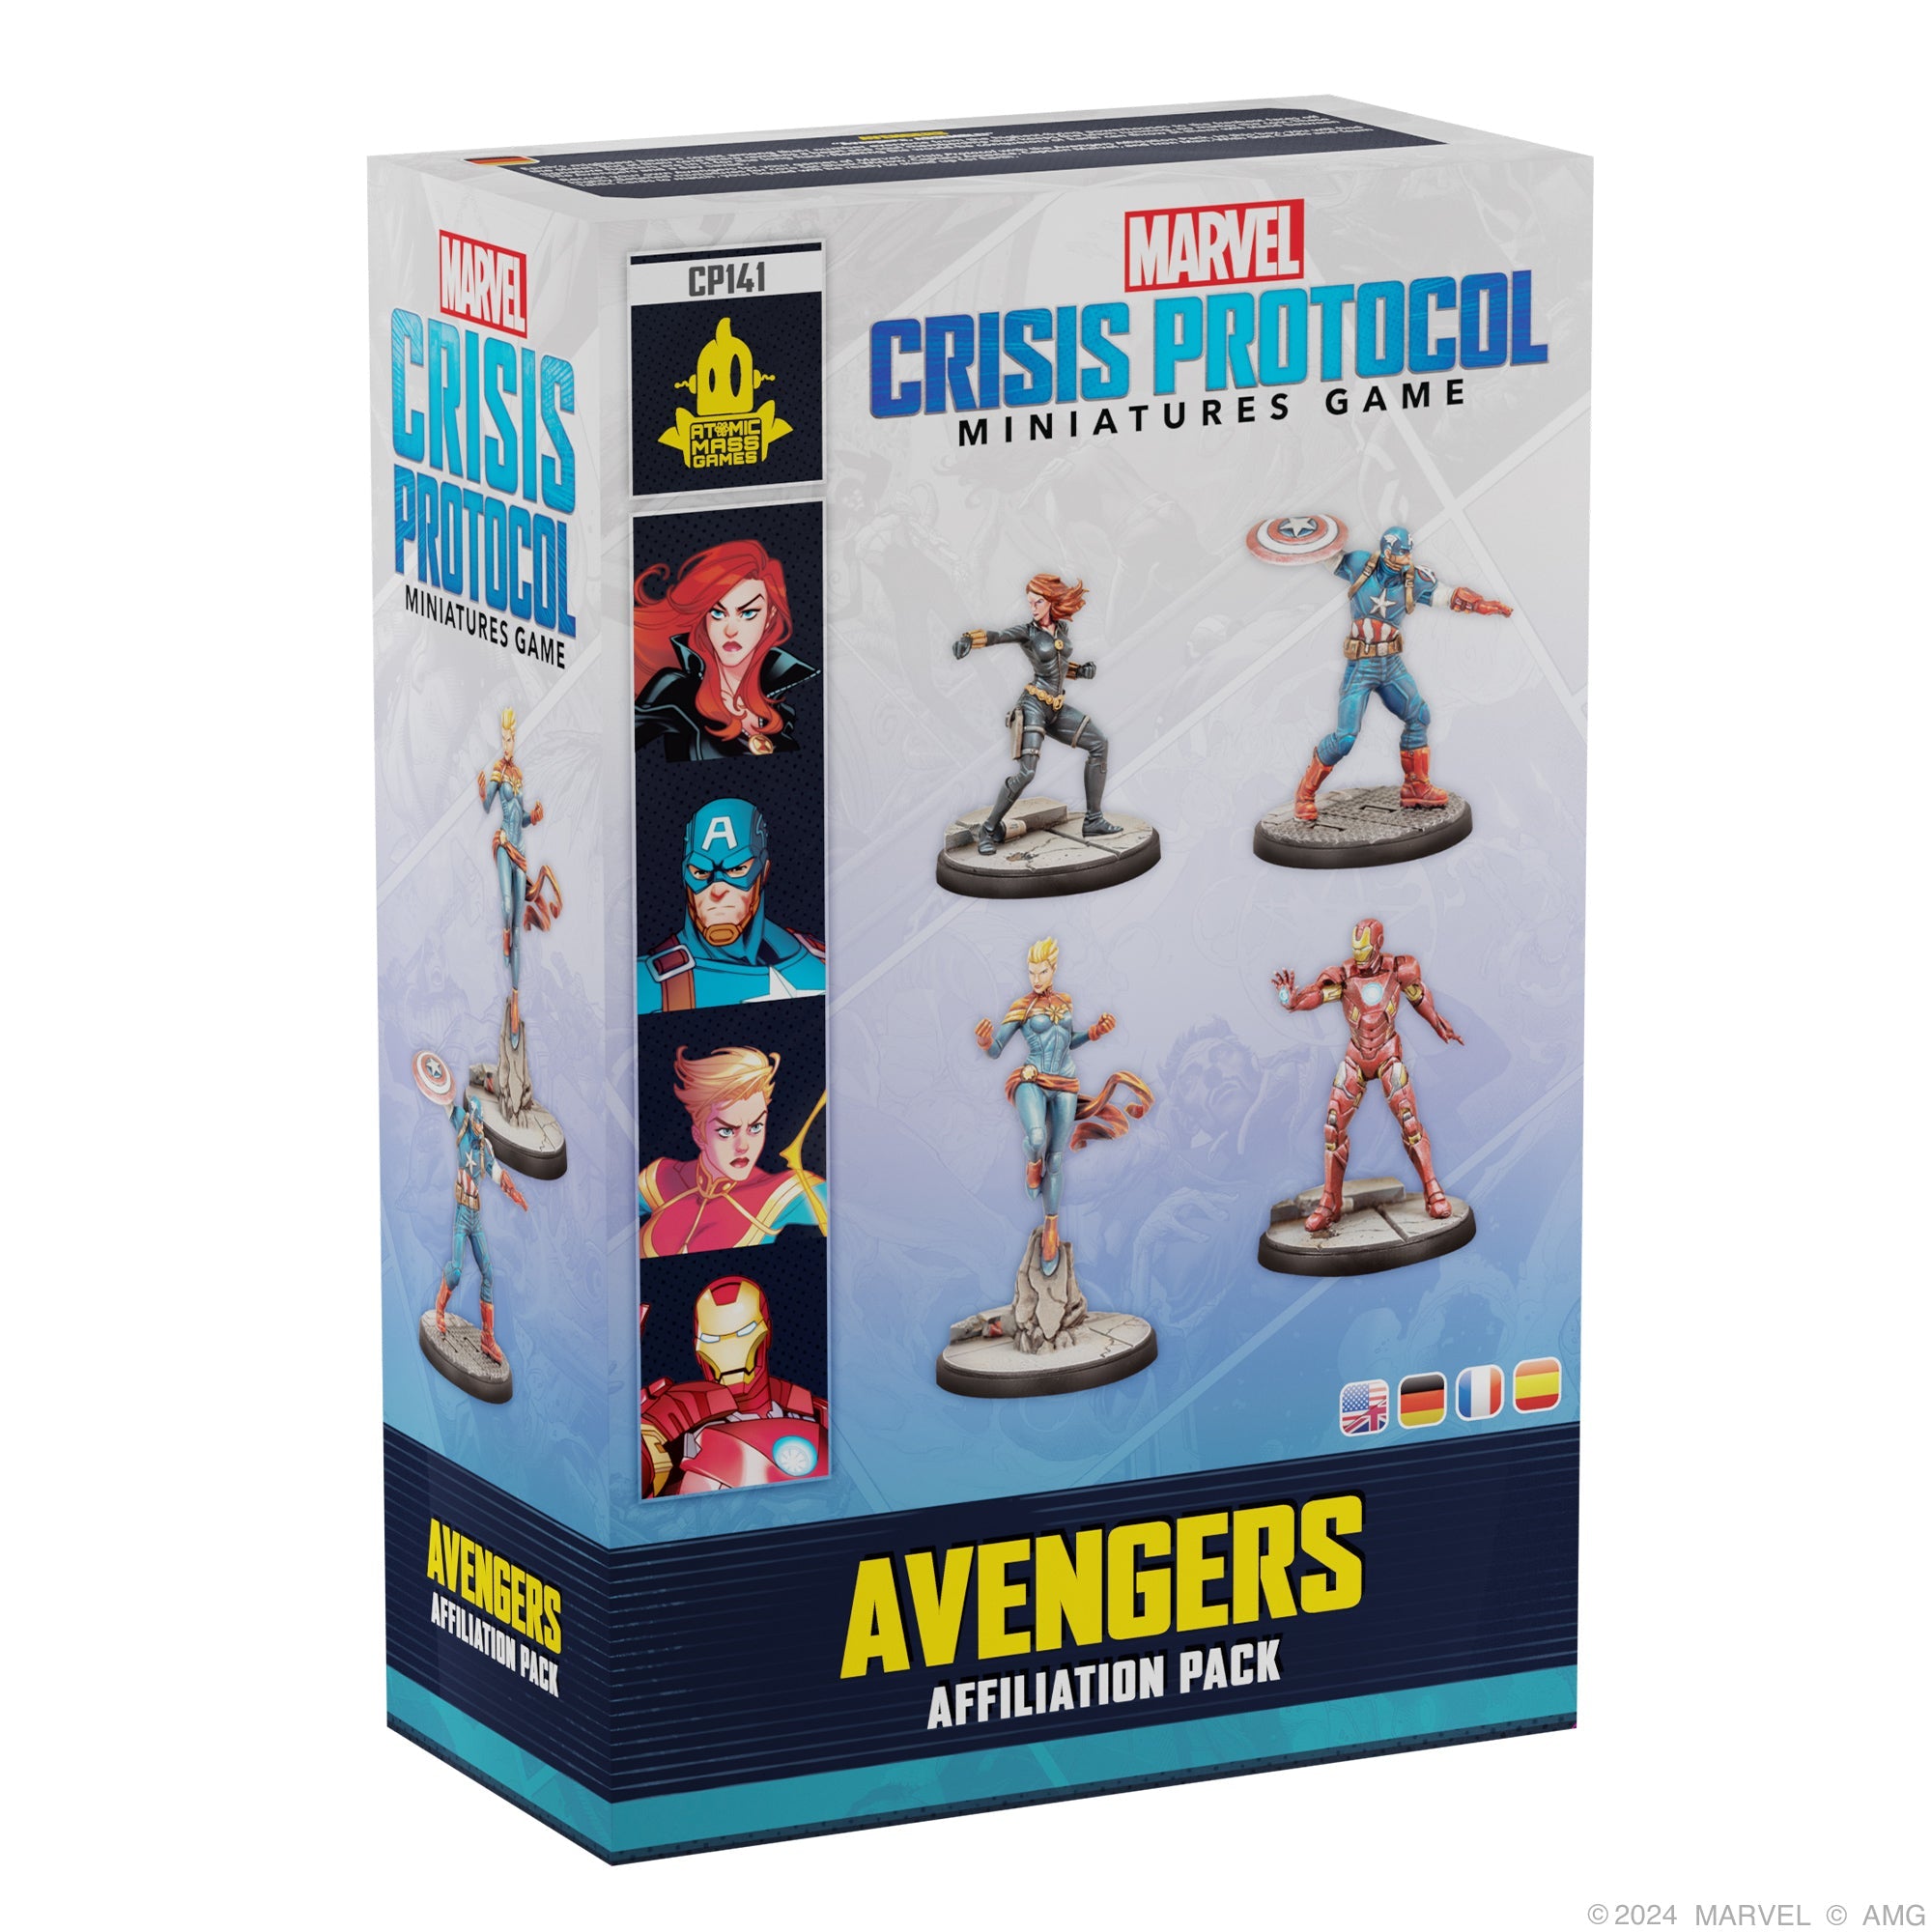 MARVEL CRISIS PROTOCOL: AVENGERS AFFILIATION PACK | BD Cosmos